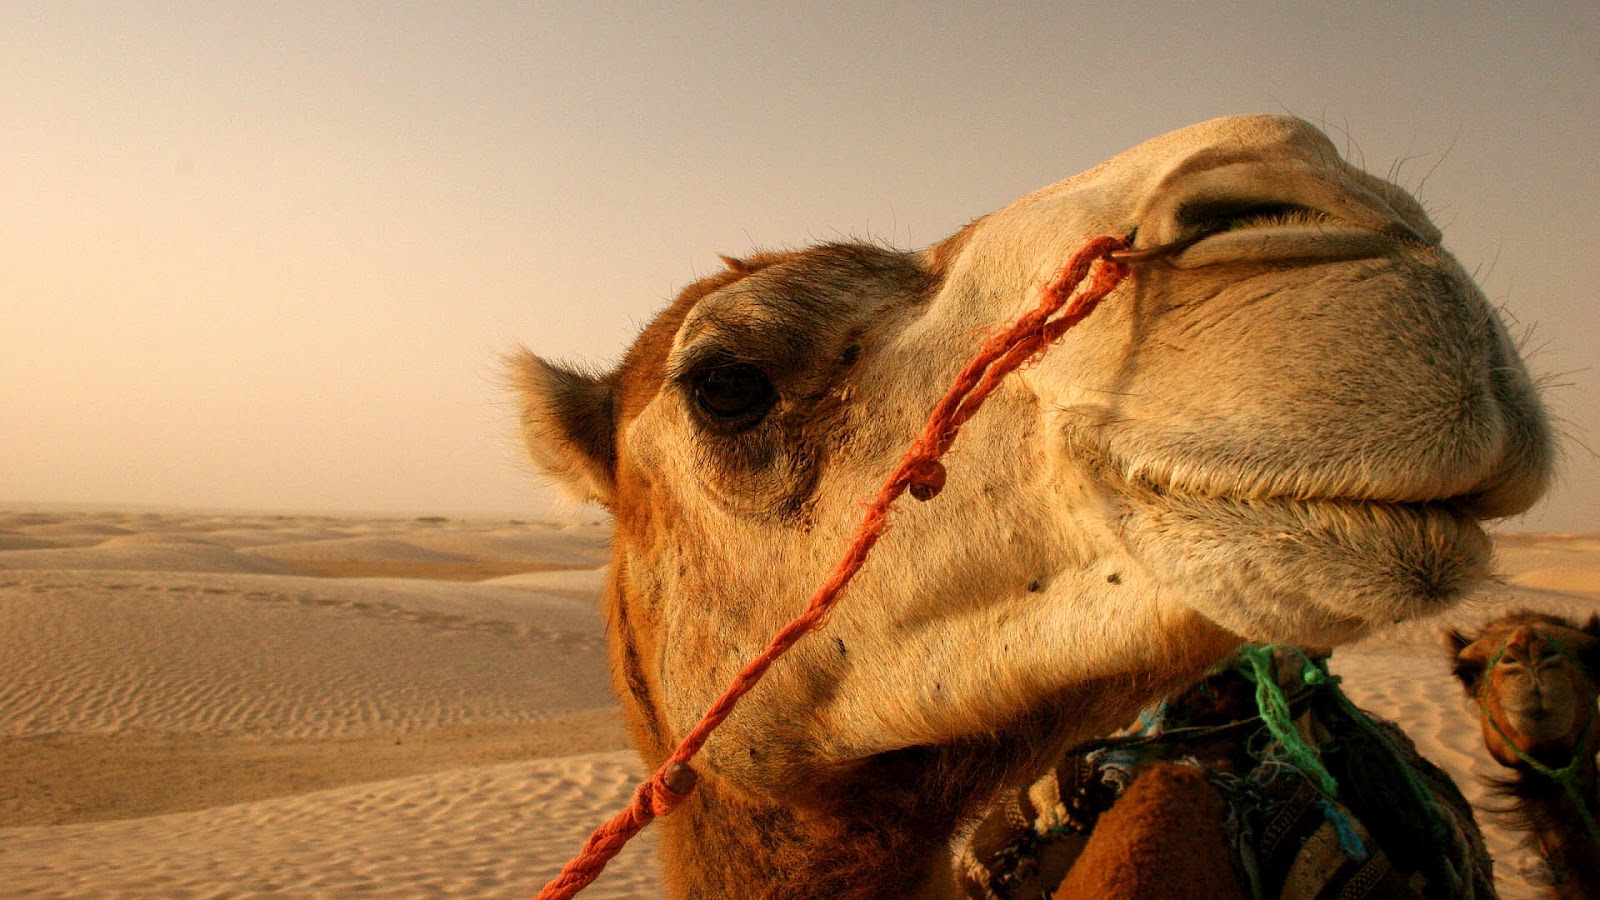 HD Camel Wallpaper With A In The Desert Camels Background